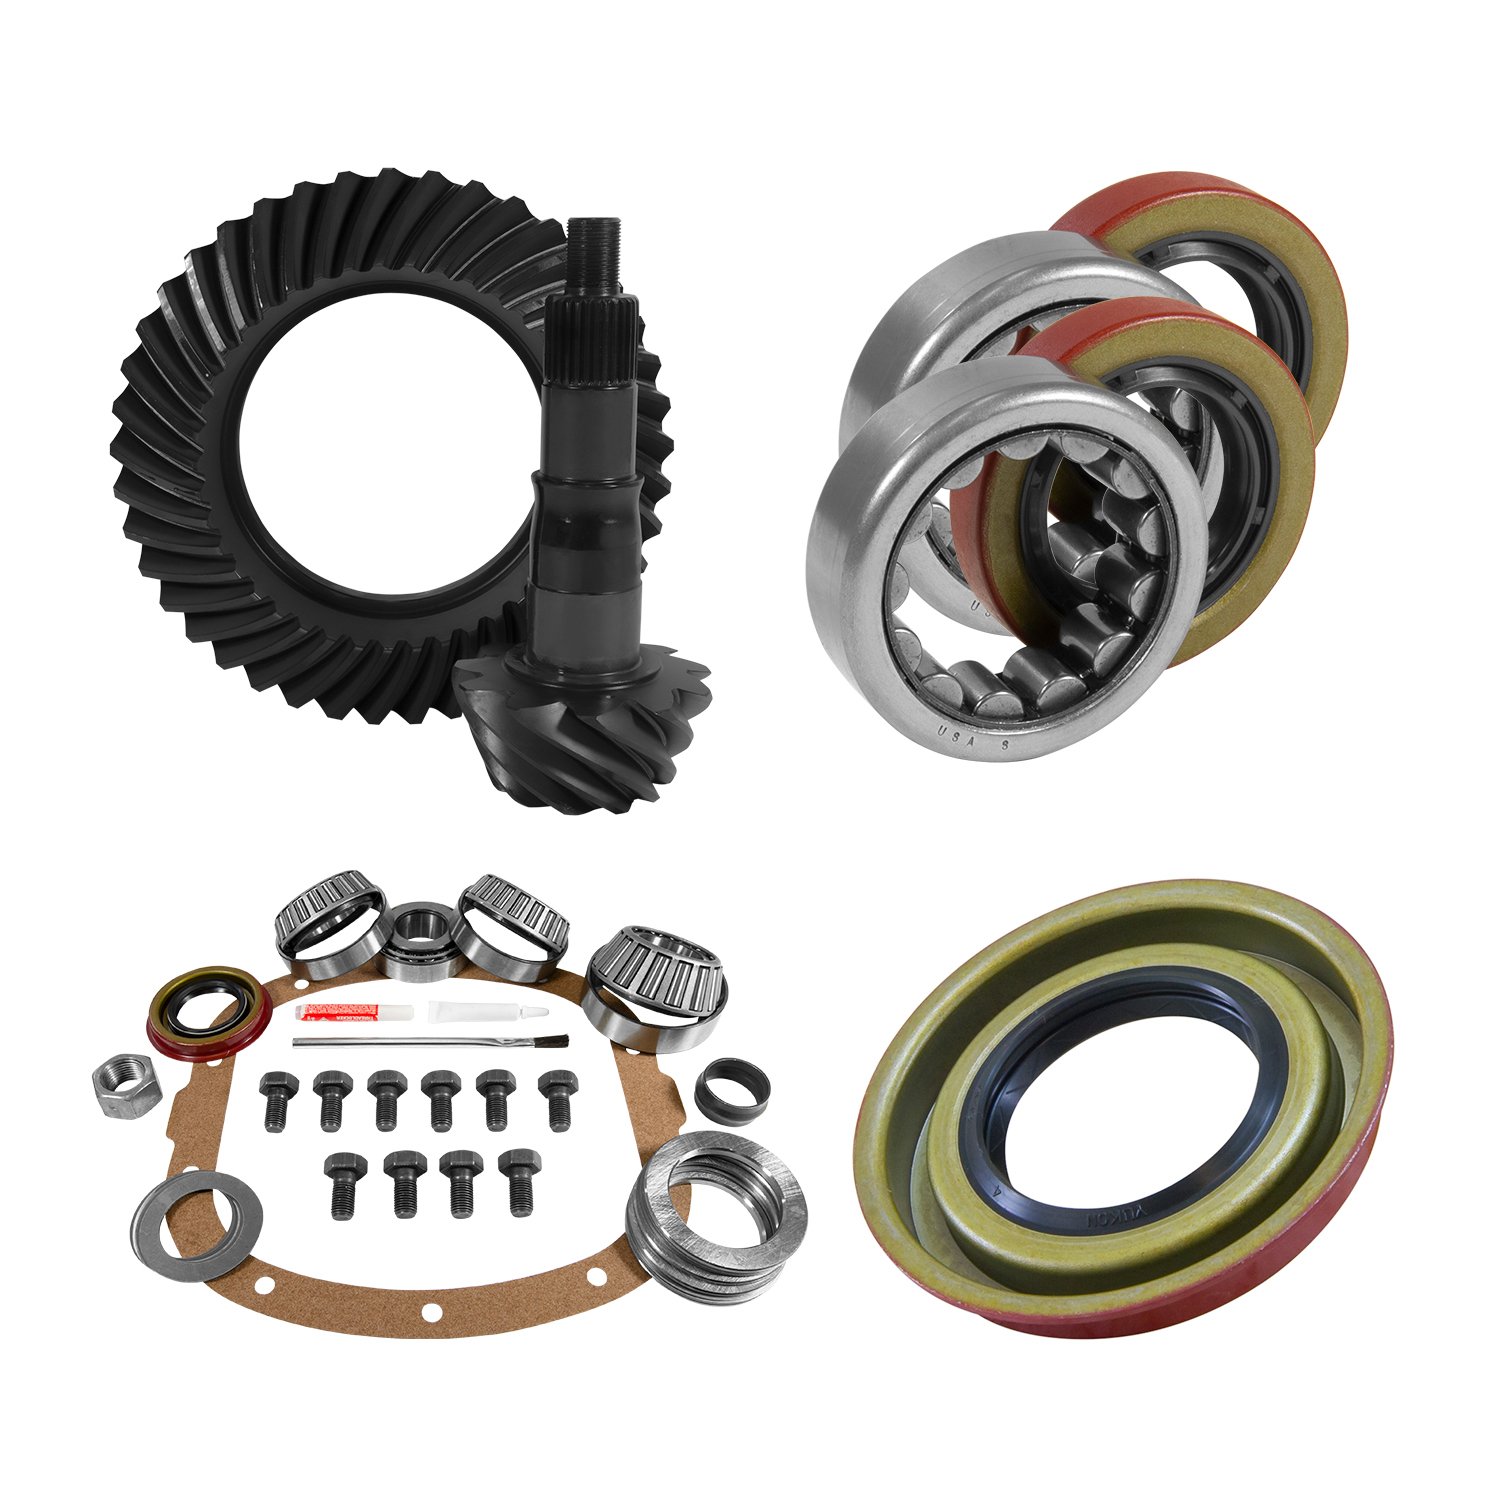 USA Standard 10693 7.5 in./7.625 in. GM 3.73 Rear Ring & Pinion Install Kit, 2.25 in. Od Axle Bearings